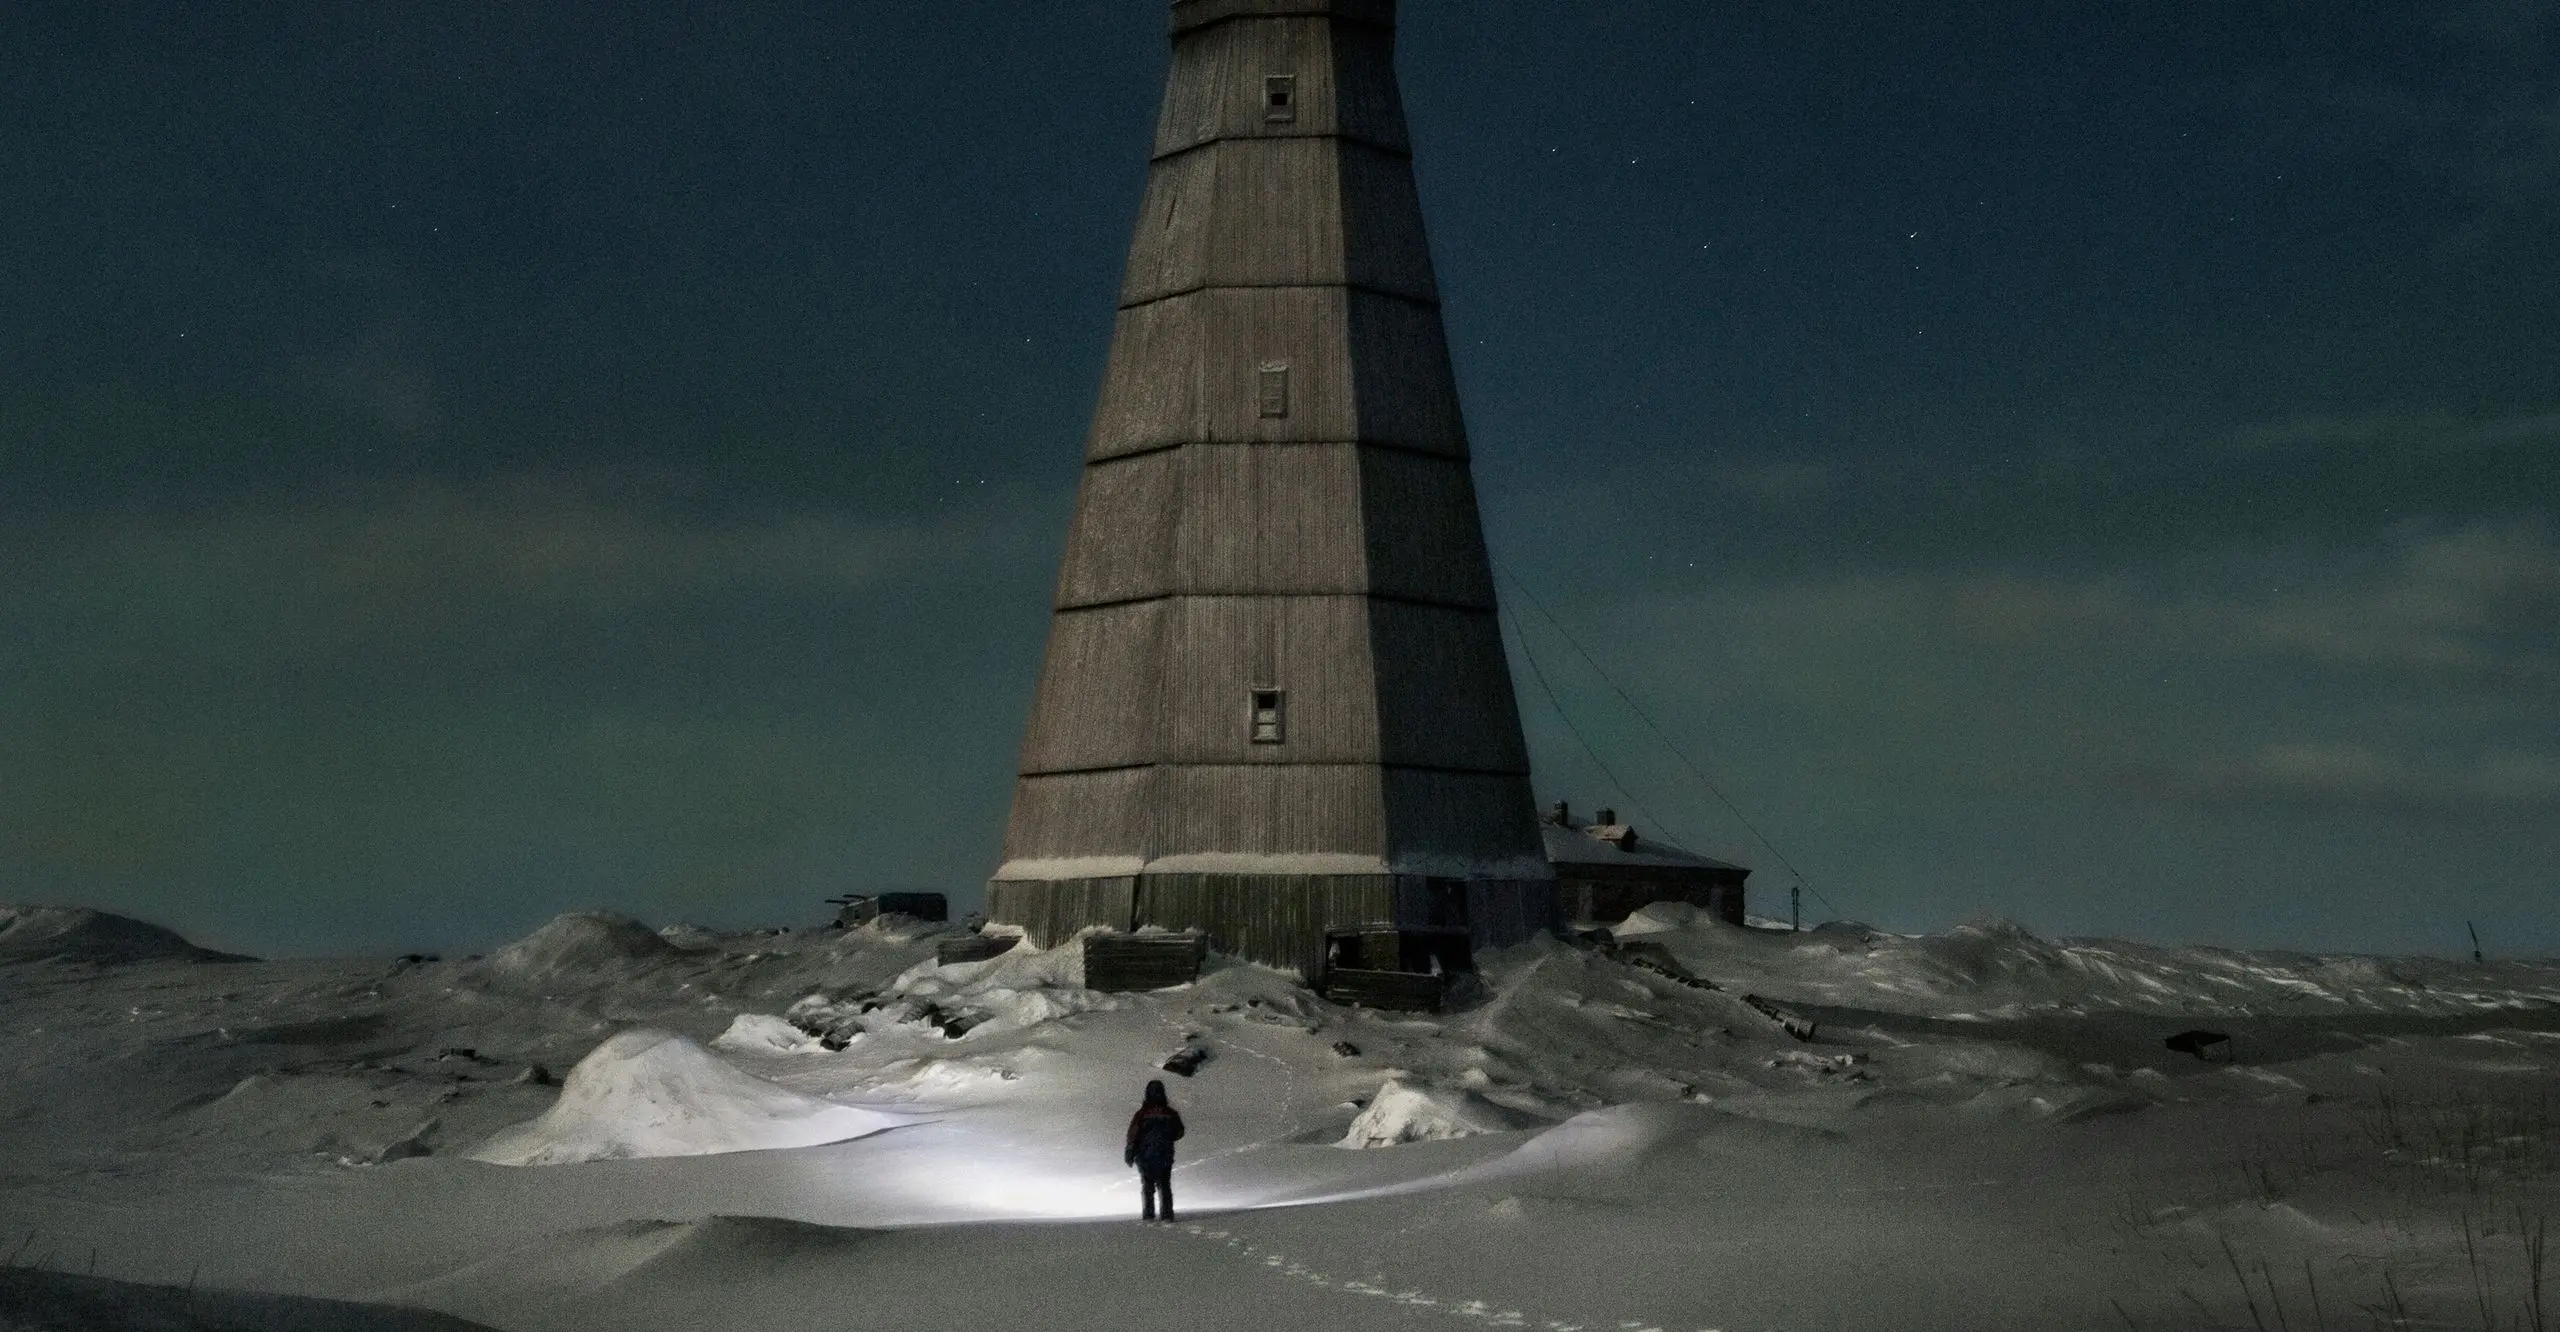 Dark, atmospheric colour photograph of a snow landcape at night with a silhouetted figure standing infront of a large lighthouse building